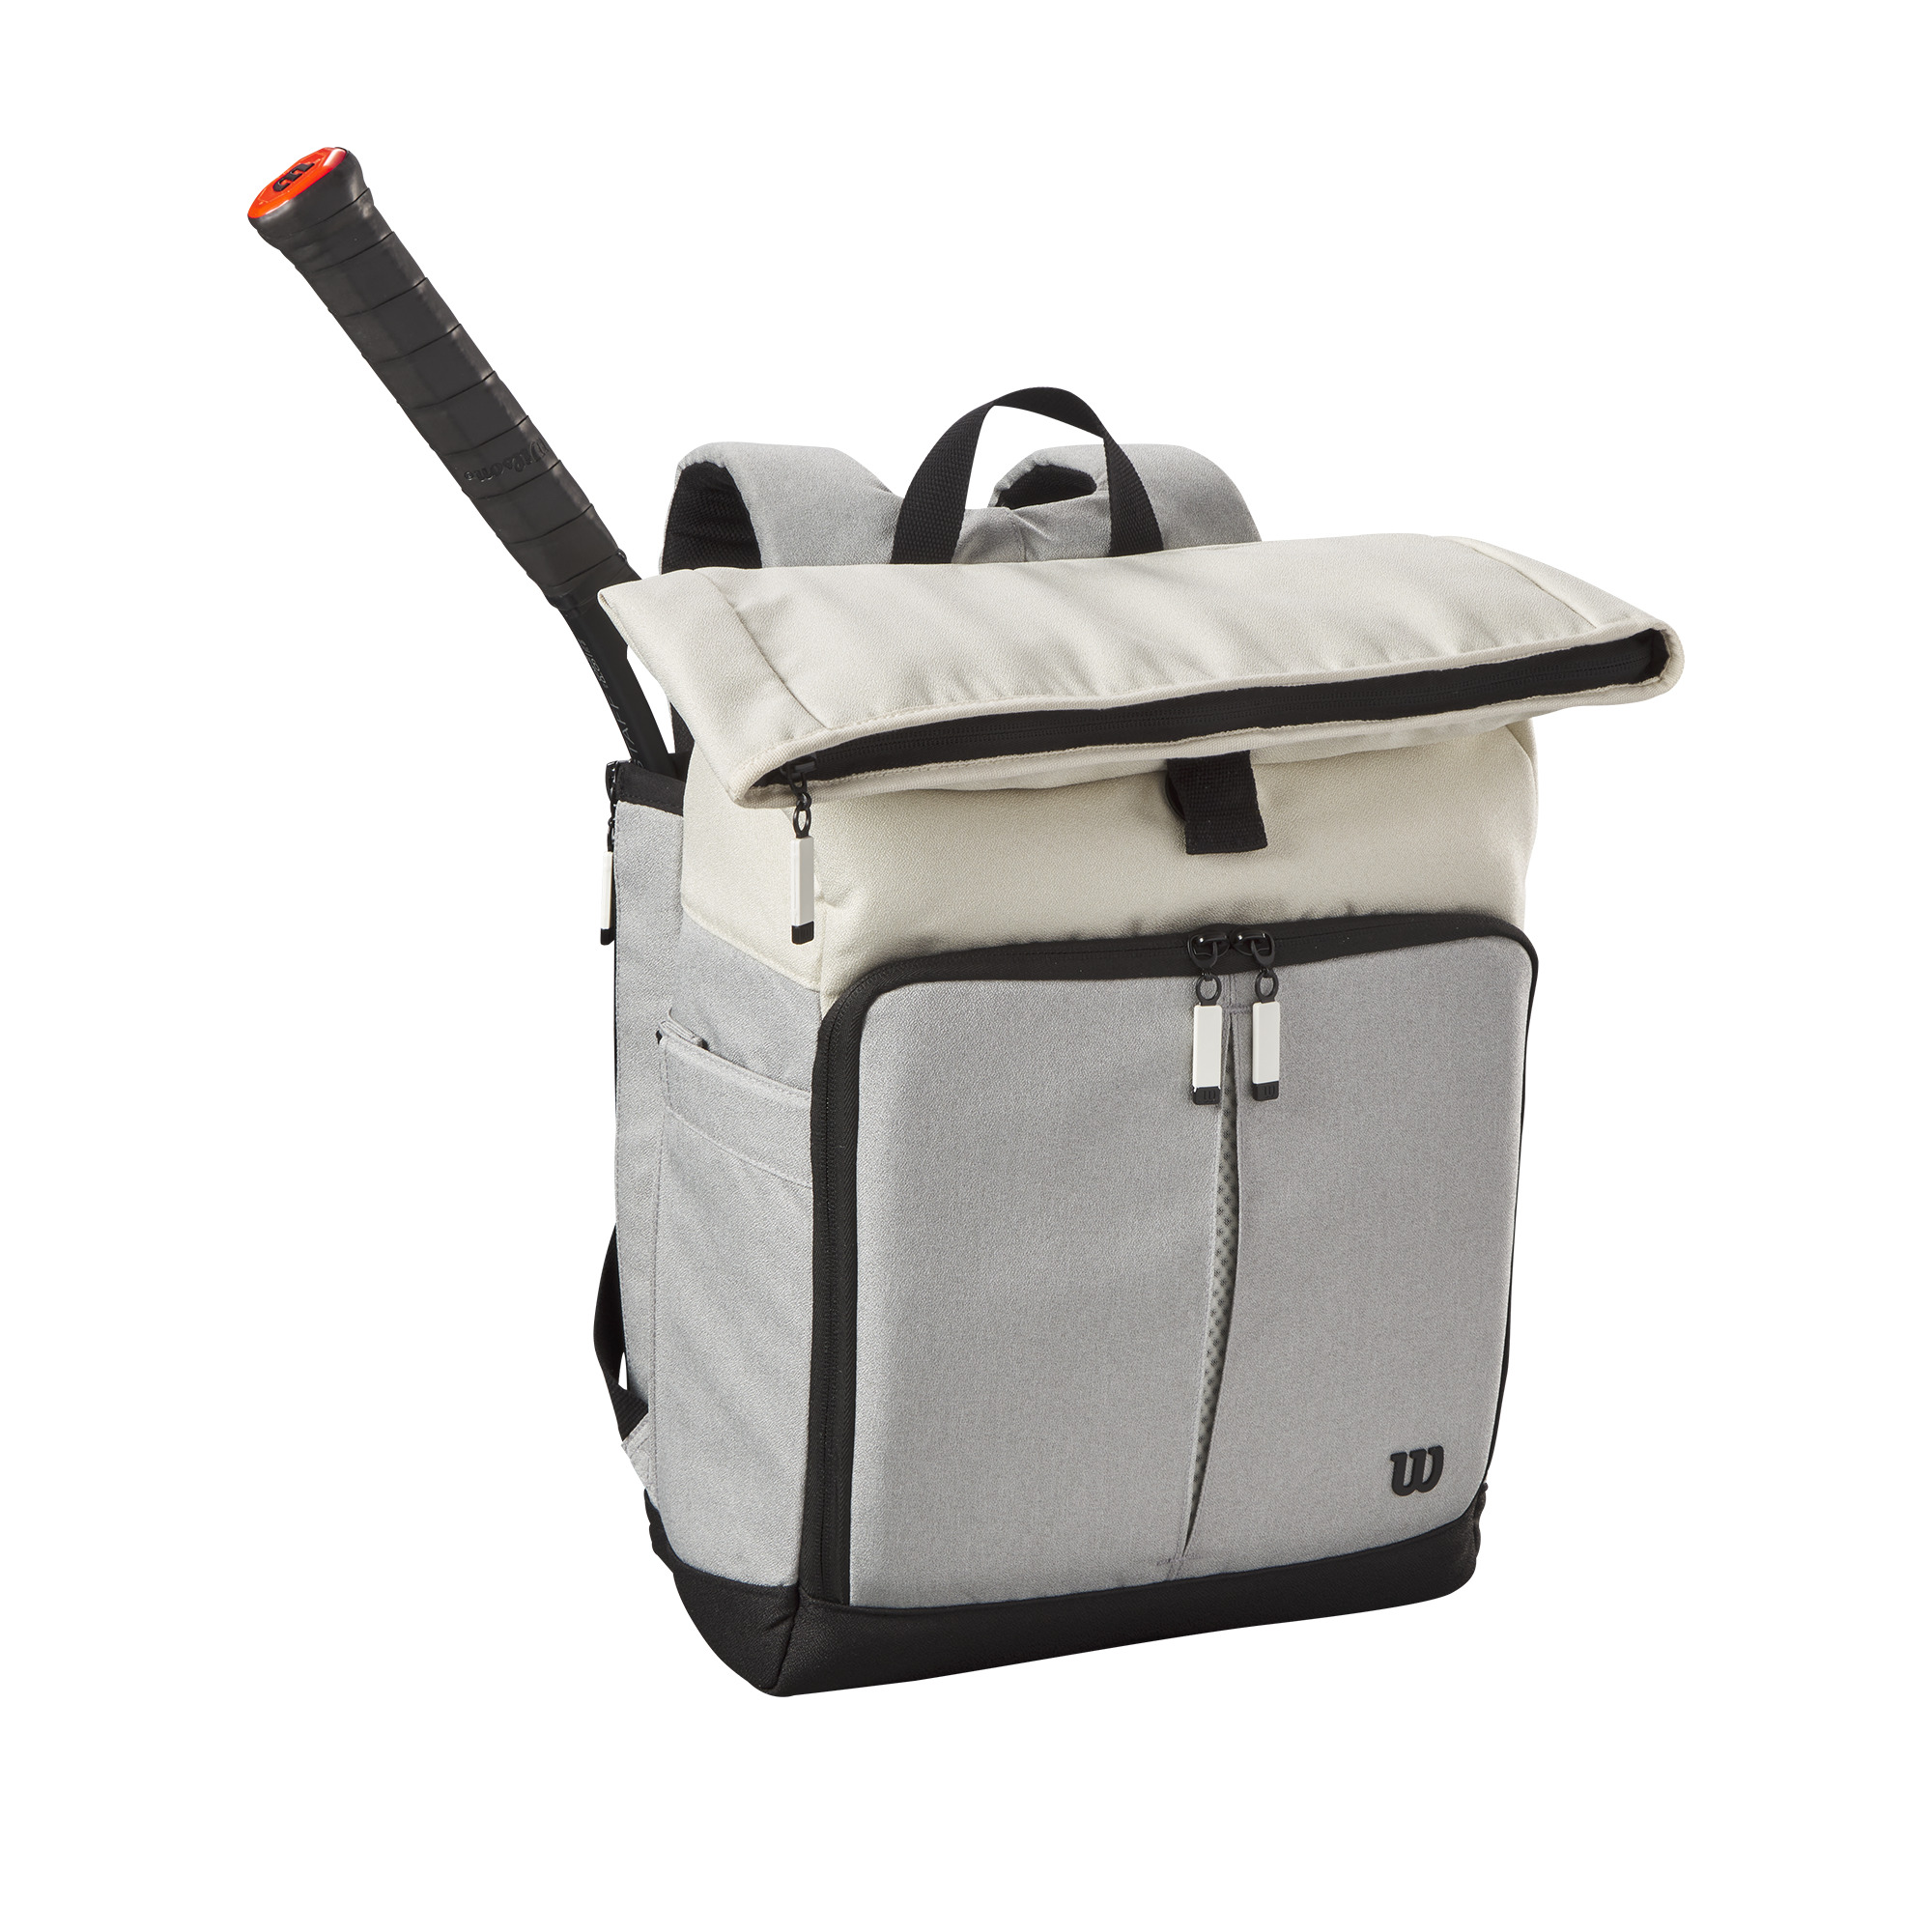 WR8023201_1_Lifestyle_Foldover_Backpack_GY_BU.png.high-res